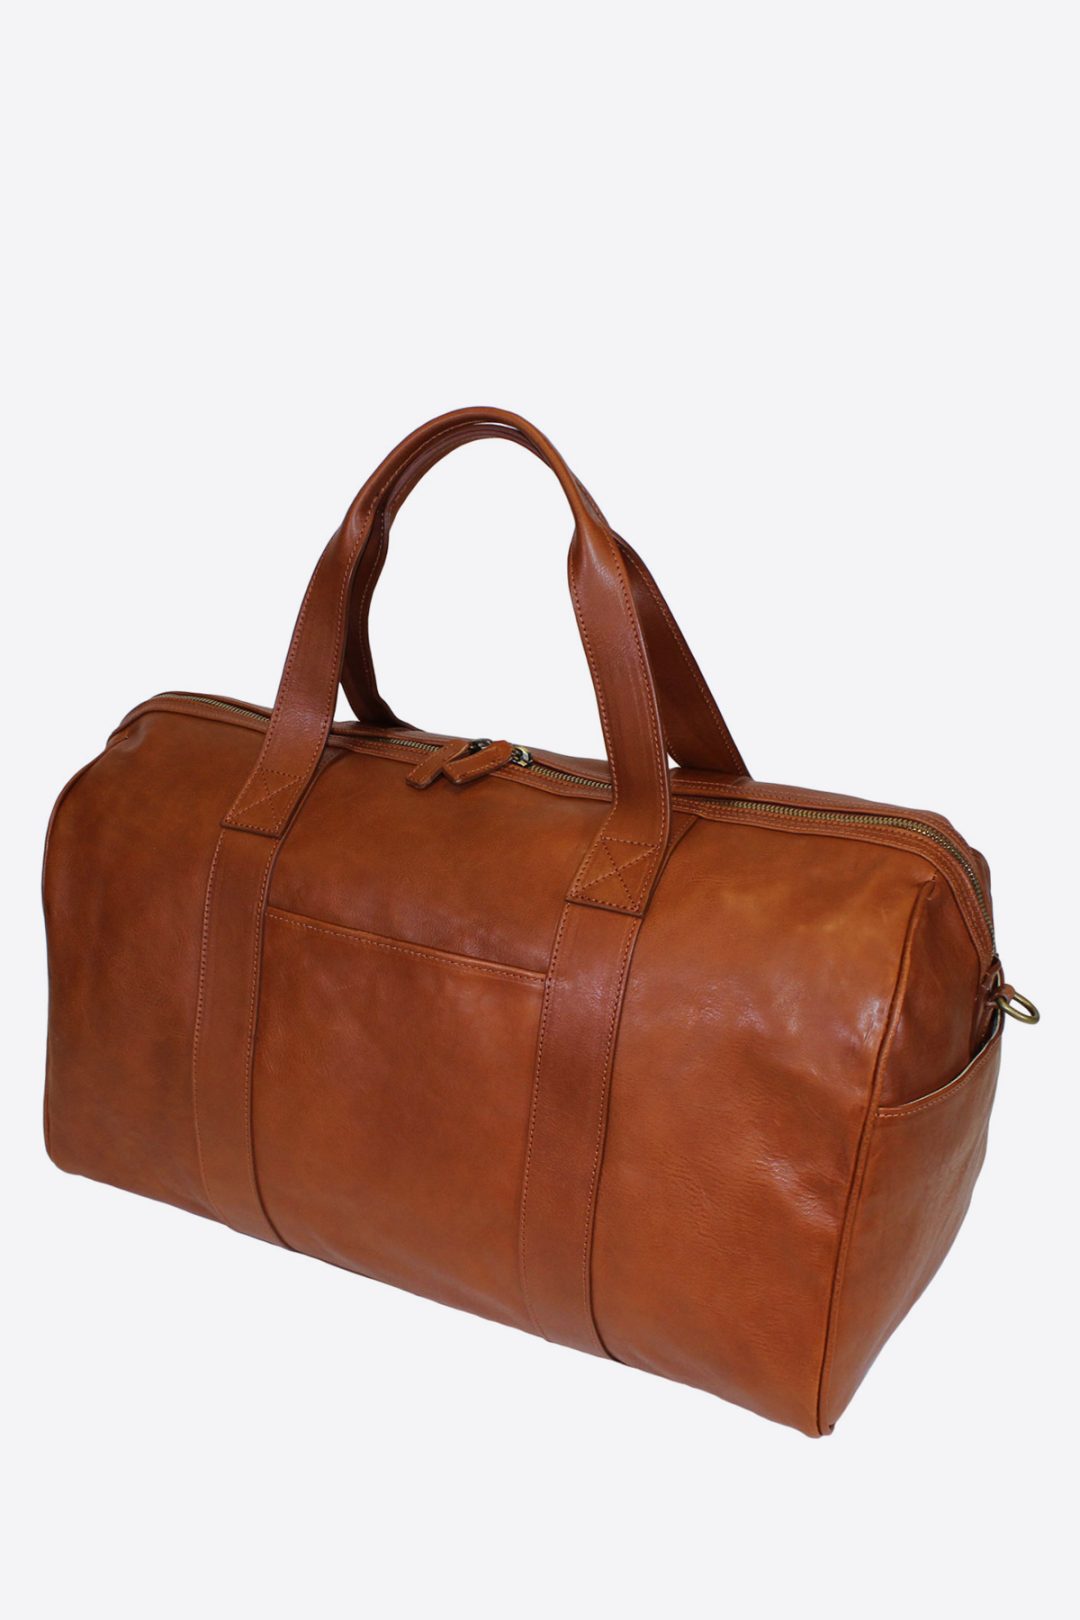 Vesting Verbaasd plannen Travel Bag Terrida - Made in Italy, vegetable tanned leather duffle